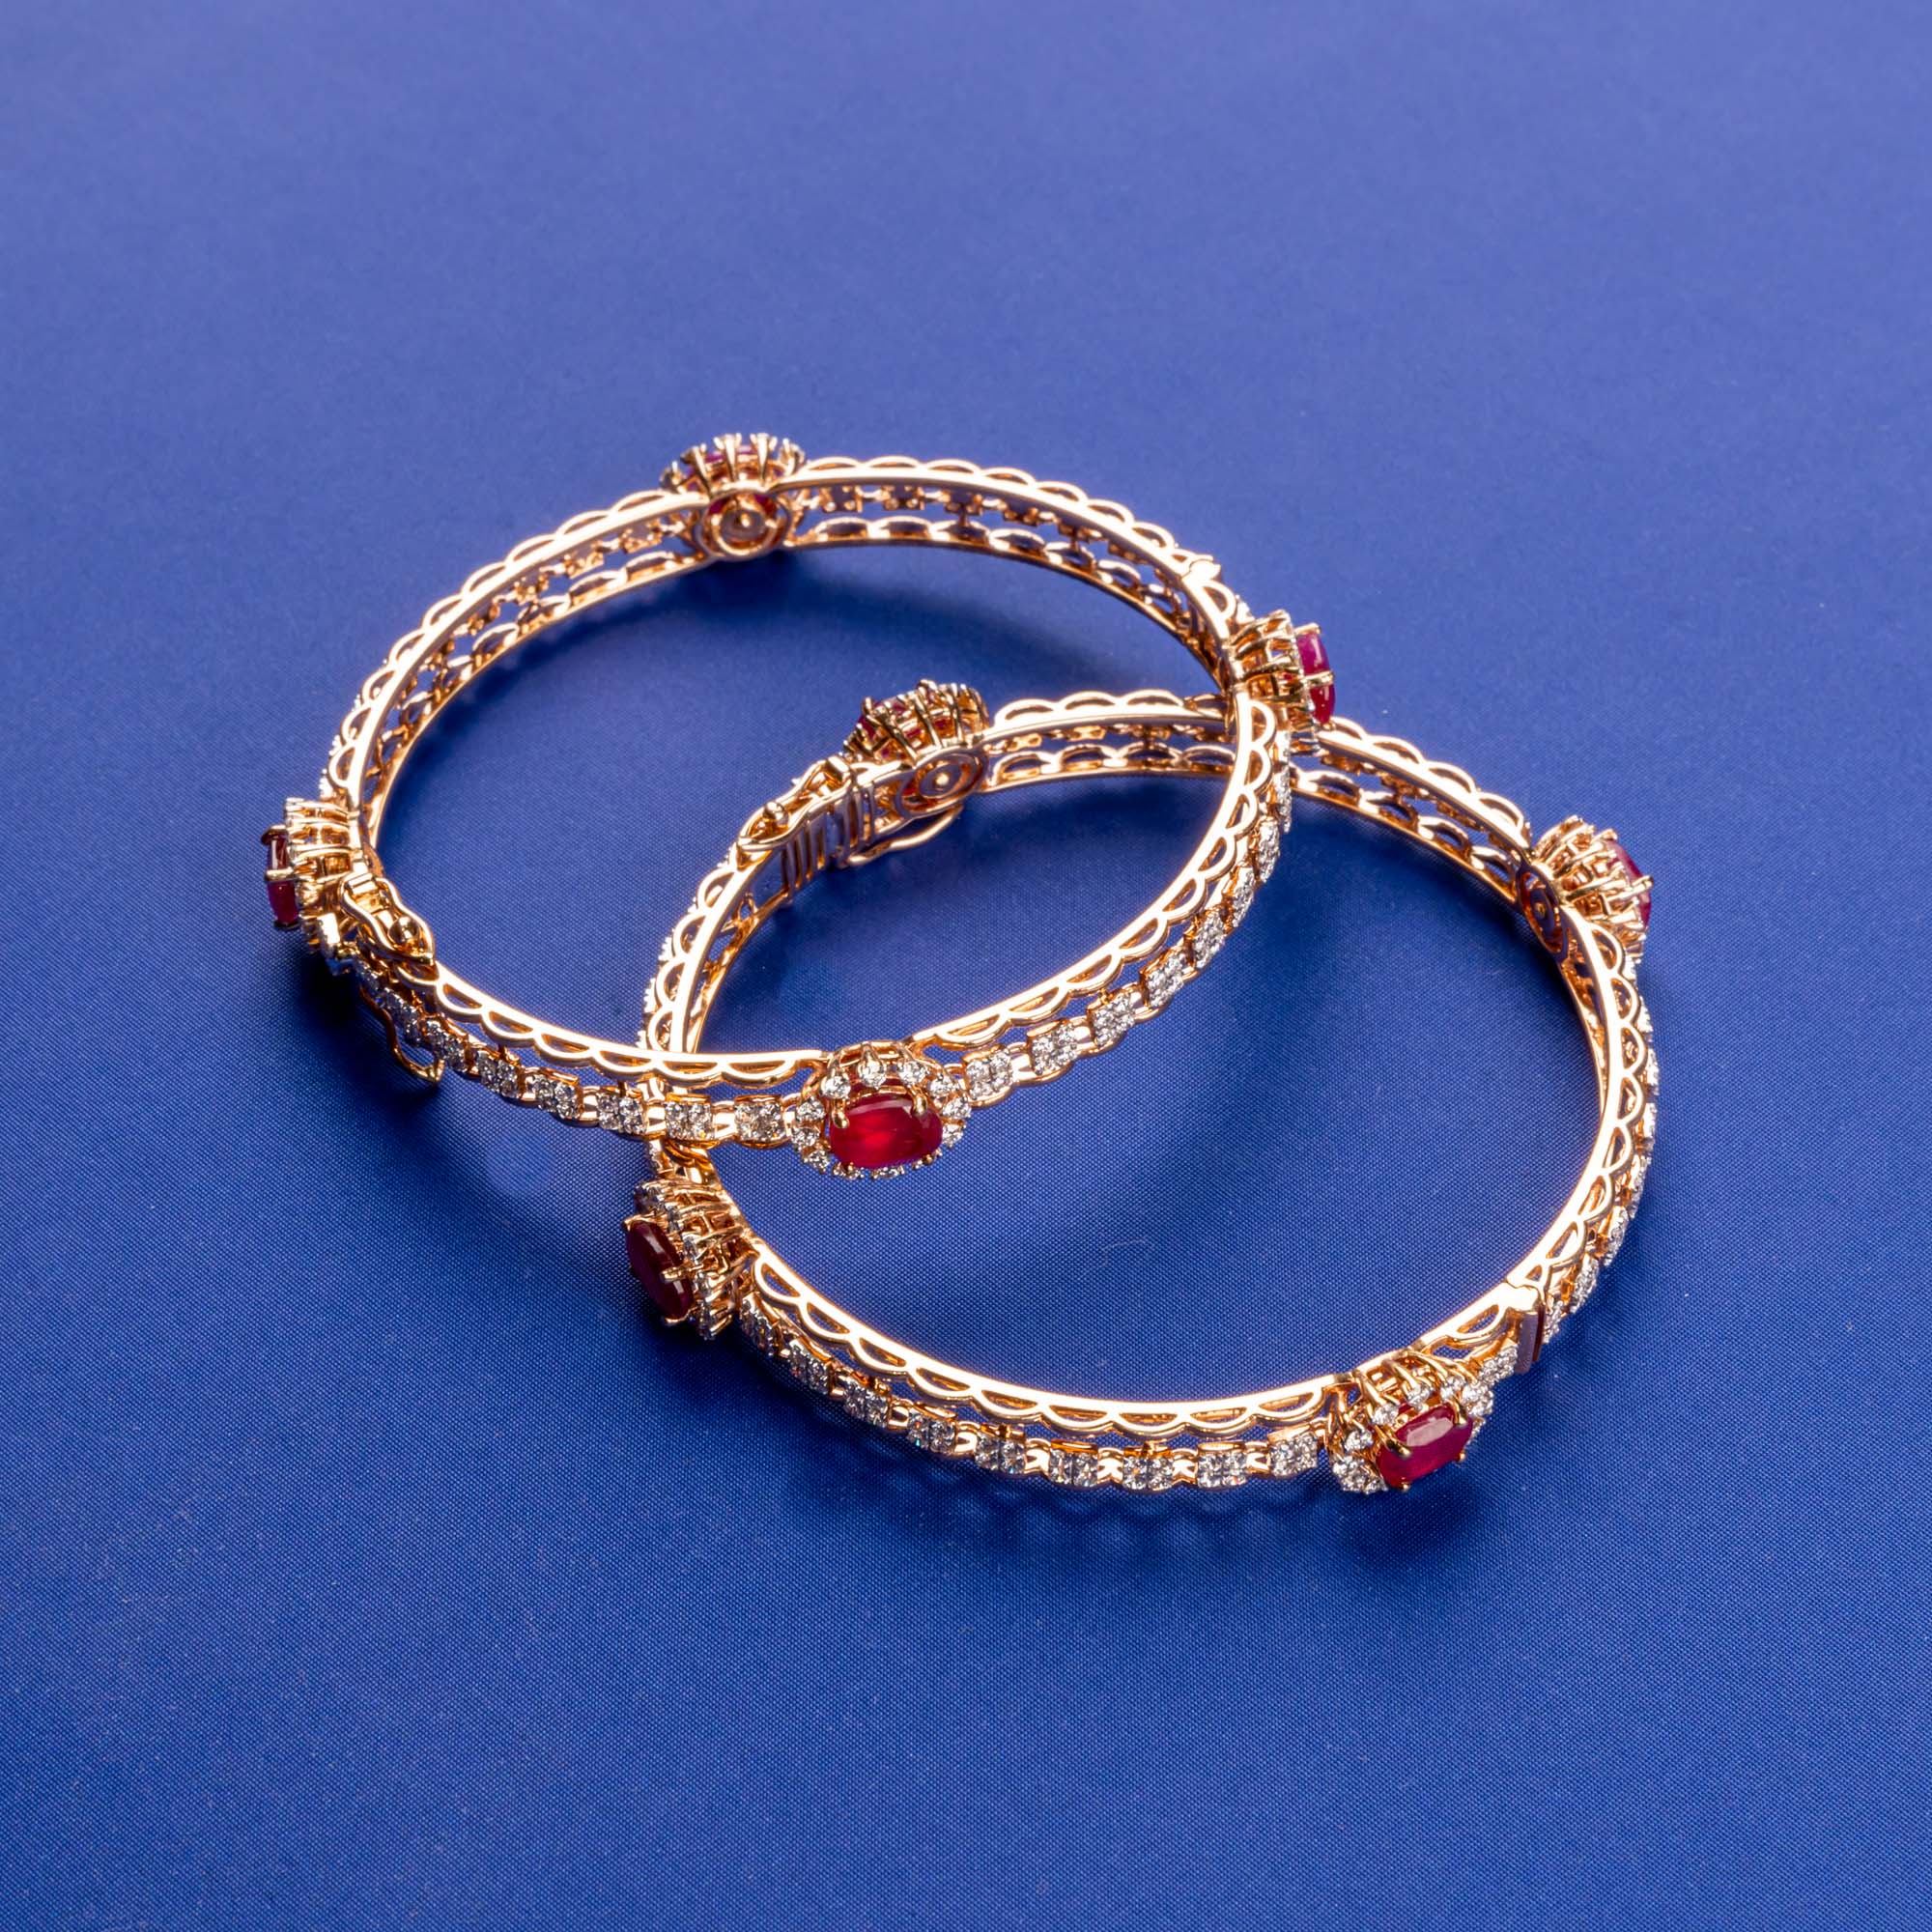 Enchanting Blooms: Handmade 18K Rose Gold Diamond Bangle with Delicate Floral Motif and 4 Sparkling Ruby Accents